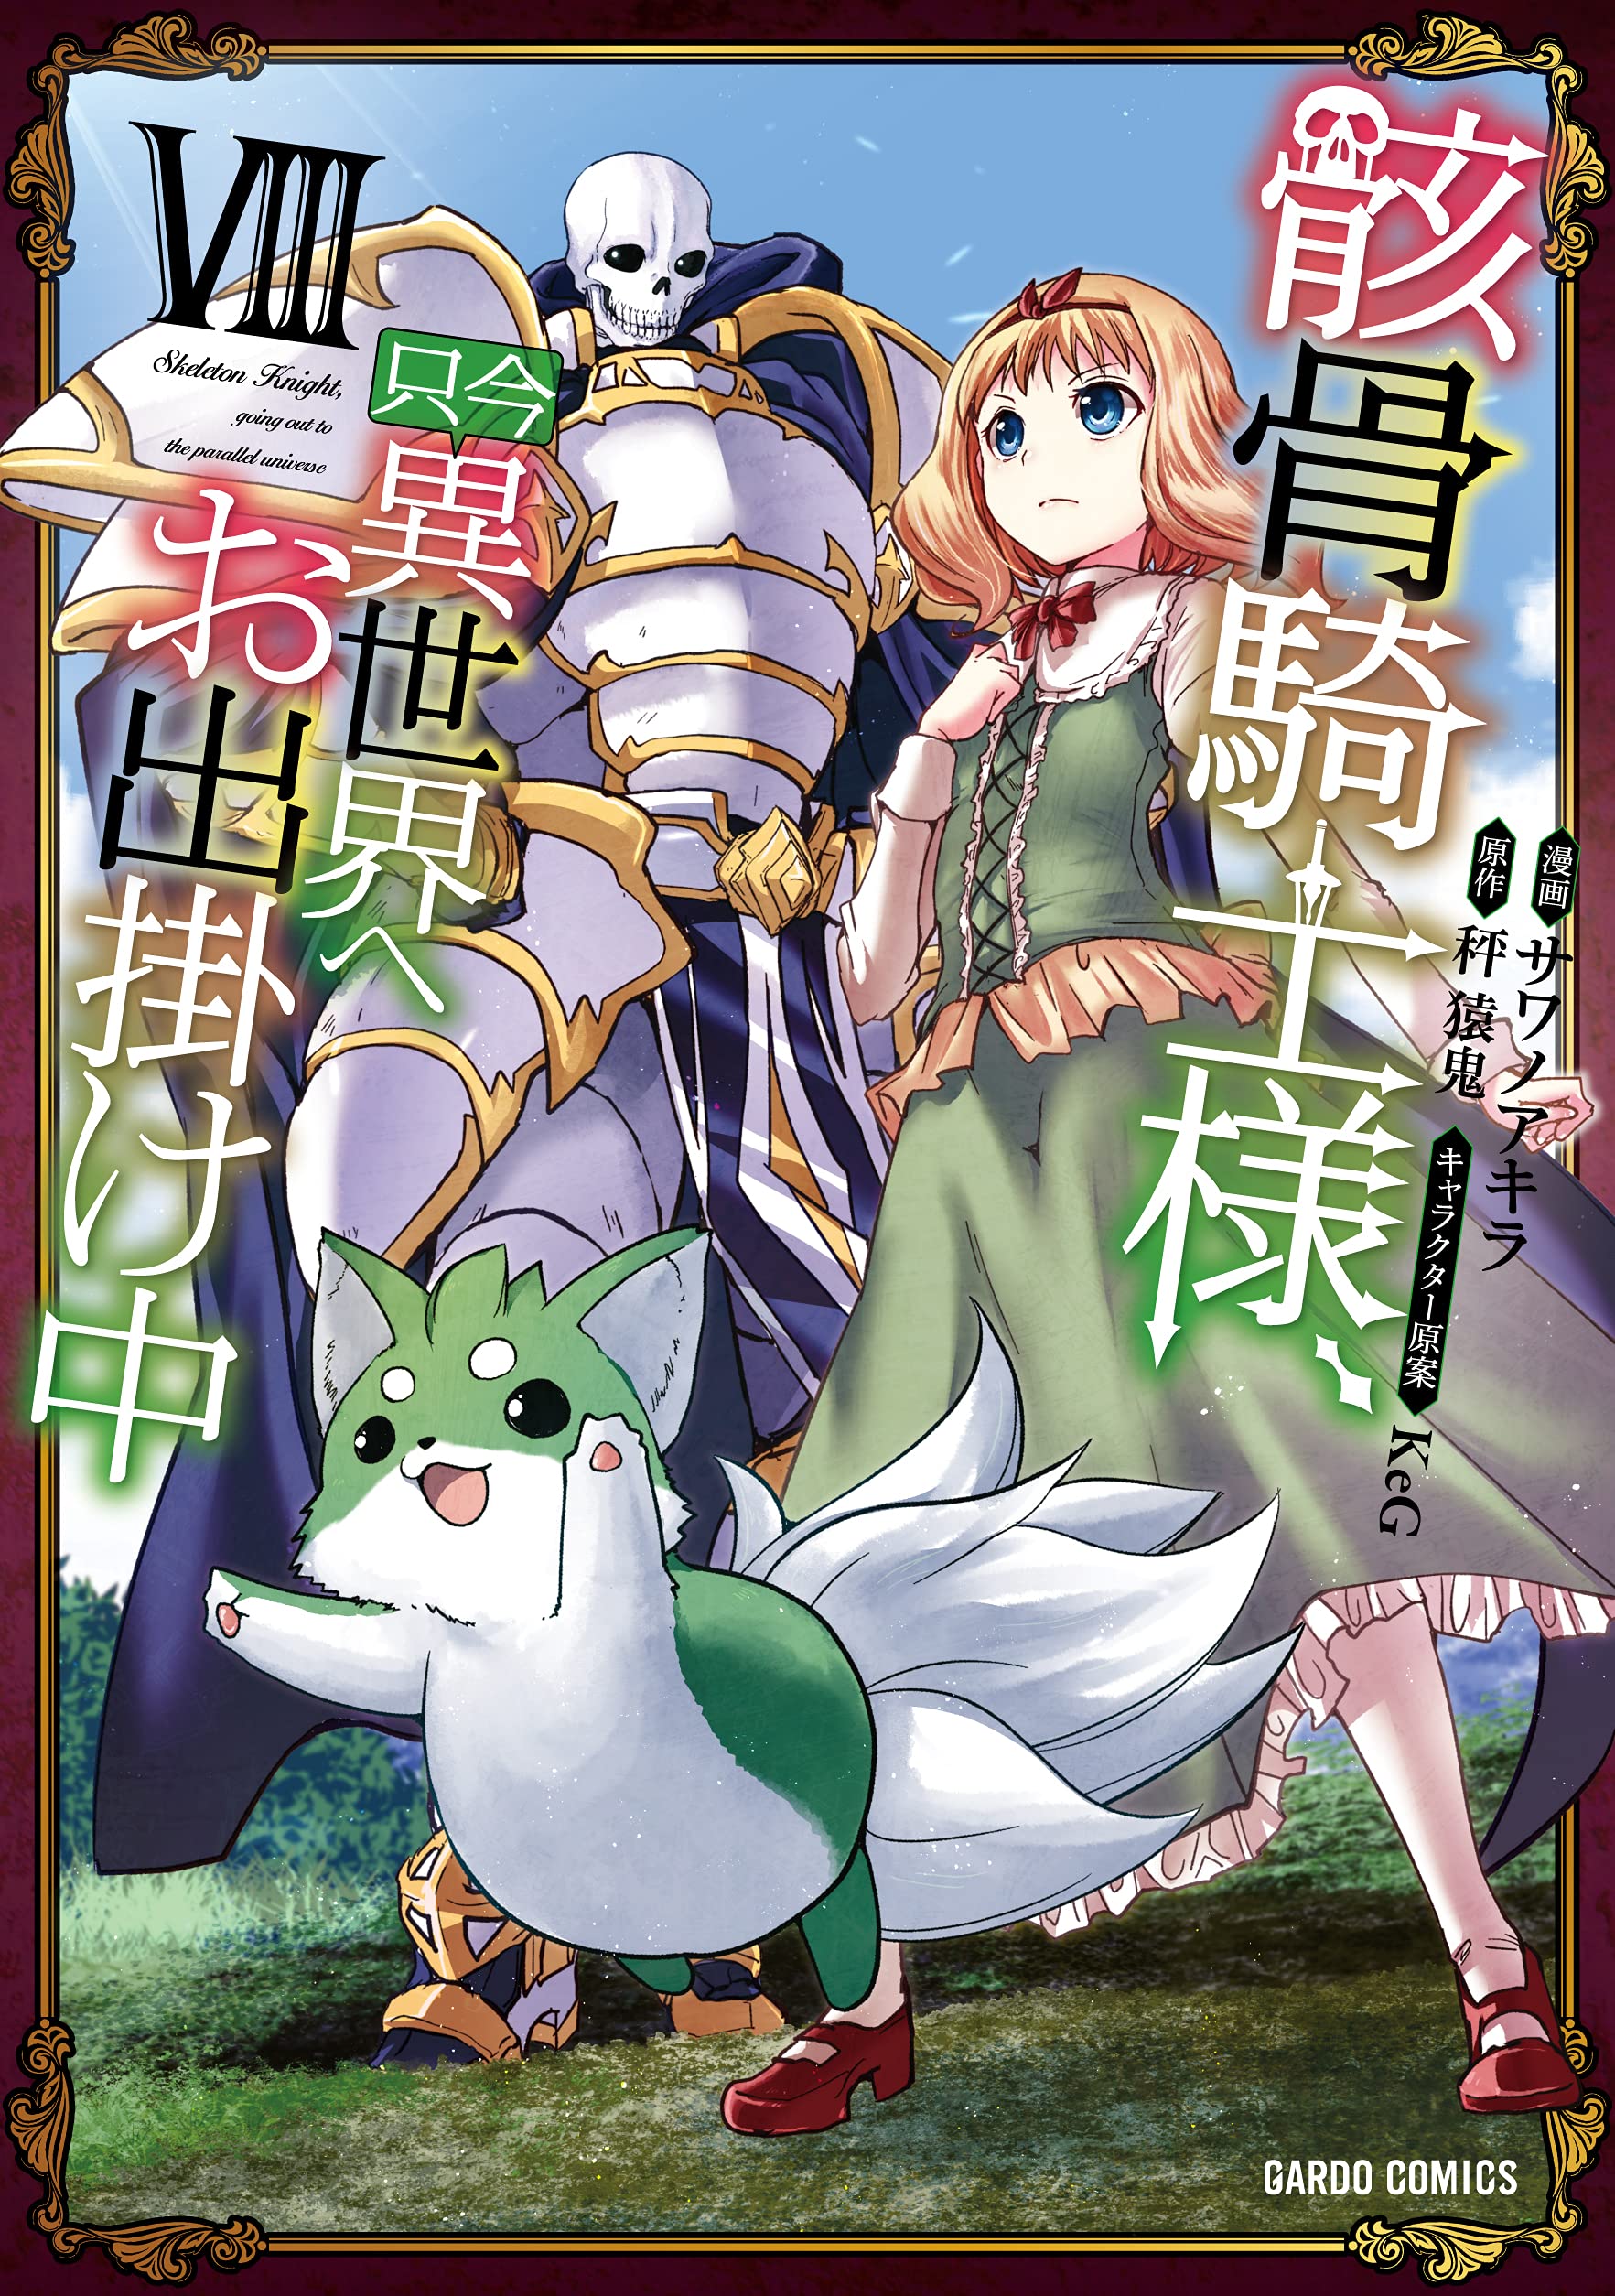 Skeleton Knight in Another World (Manga) Vol. 12 (Paperback